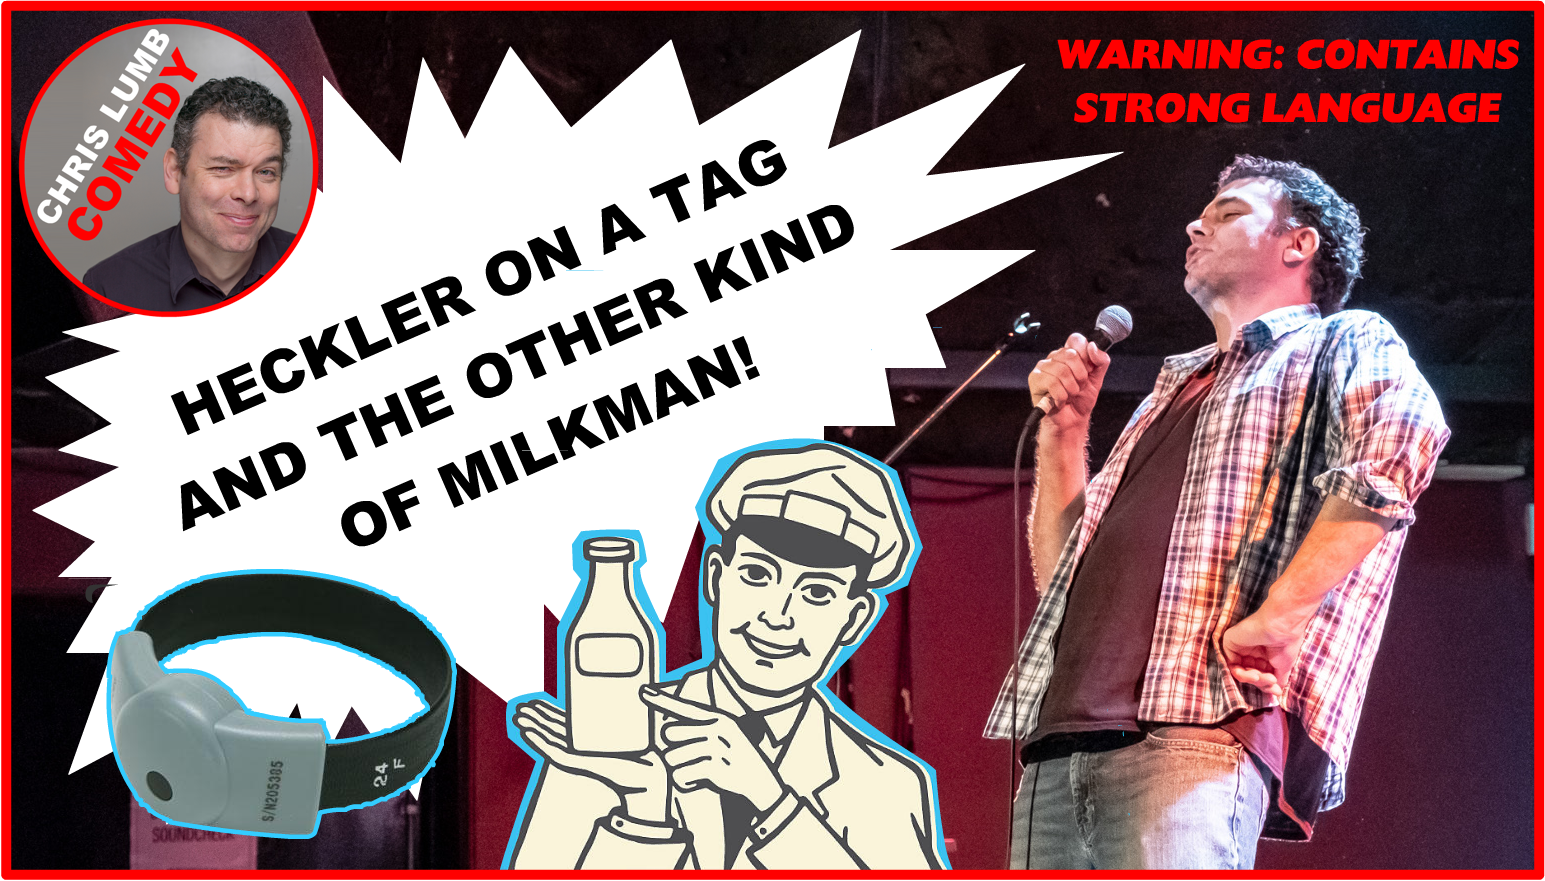 Chris Lumb Comedy "Heckler on a Tag and the other kind of Milkman"